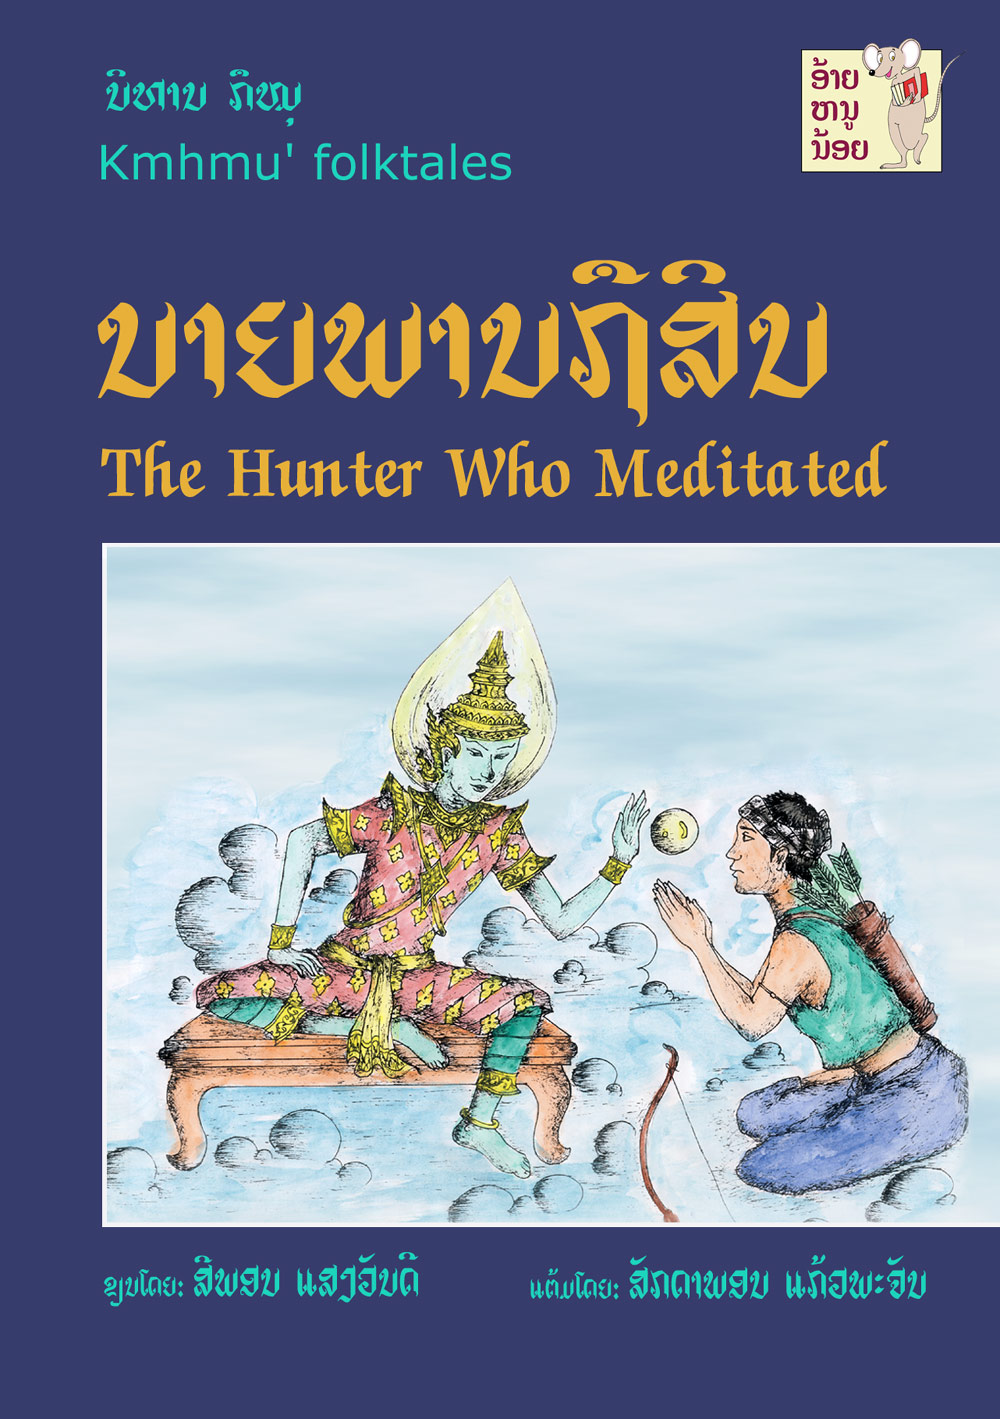 The Hunter Who Meditated large book cover, published in Lao and English